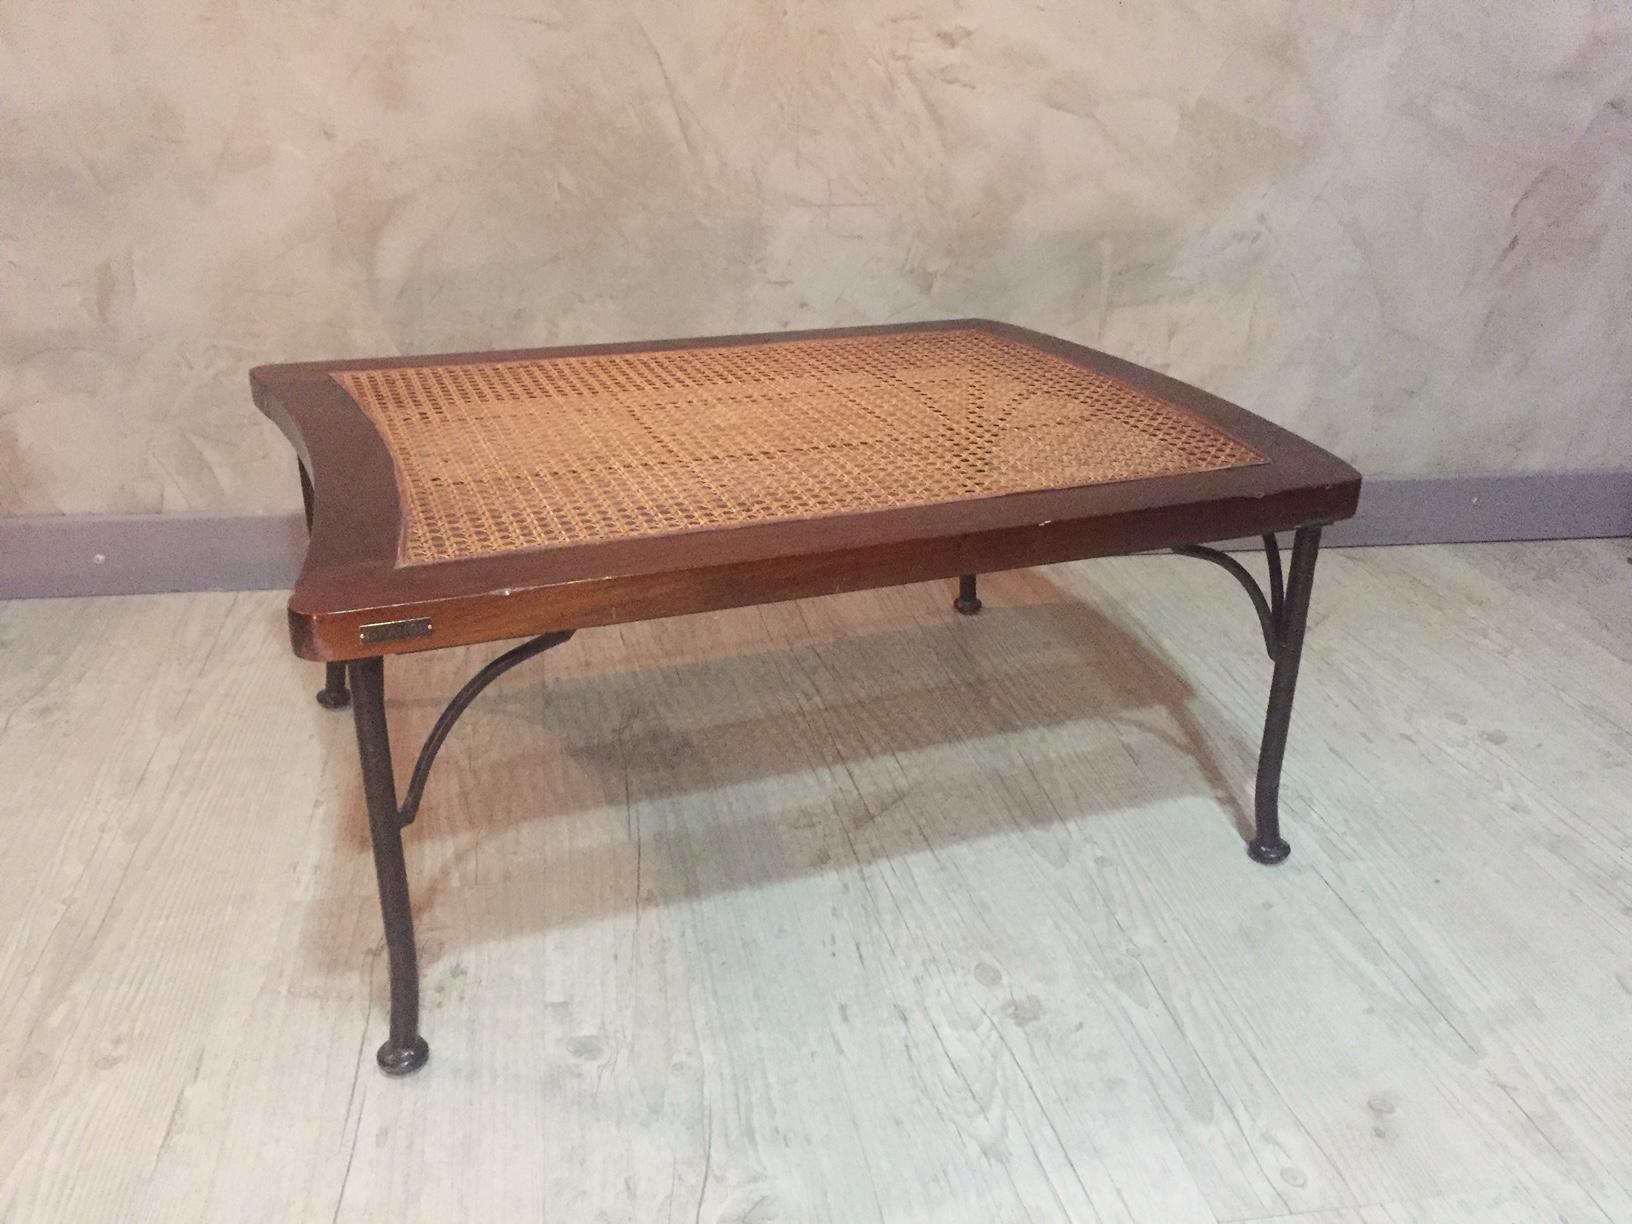 Very nice and rare 20th century, French oak caned luggage rack from the 1980s.
It was a special order for an Hotel in the south of France. Made in France by the house 